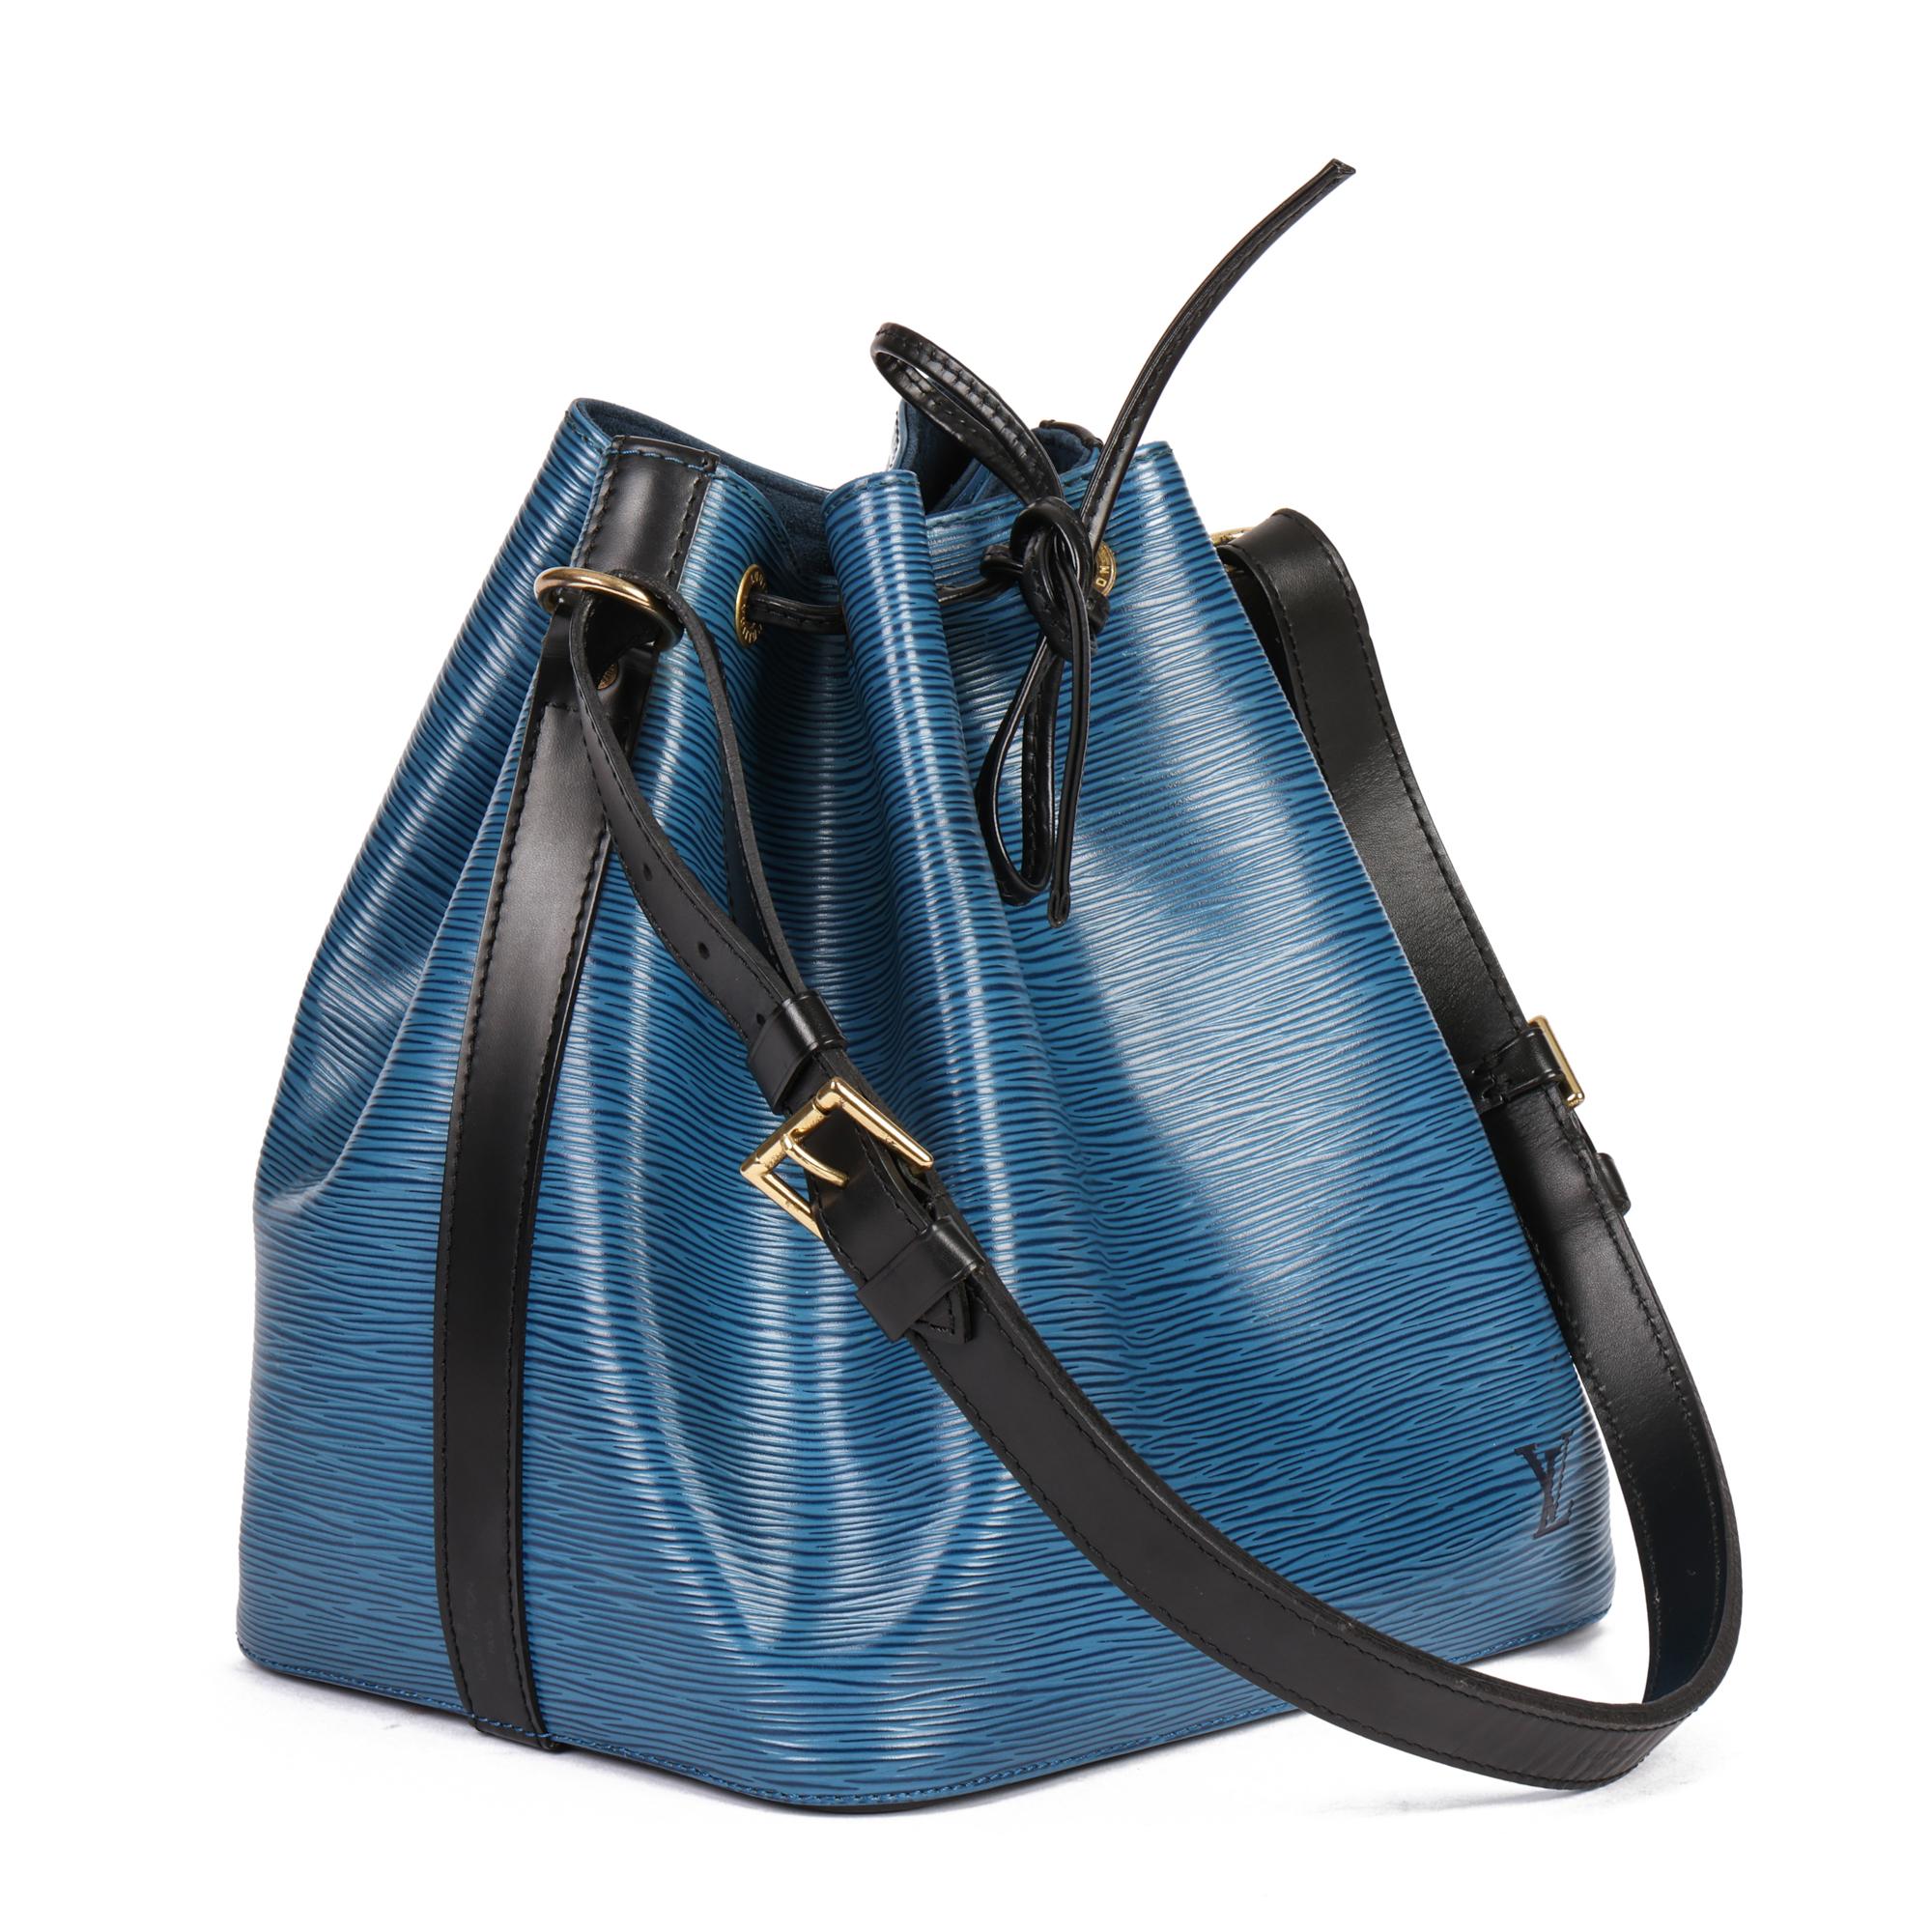 LOUIS VUITTON
Blue & Black Epi Leather Vintage Petit Noé

Xupes Reference: HB4842
Serial Number: AR1905
Age (Circa): 1995
Accompanied By: X
Authenticity Details: Date Stamp (Made in France)
Gender: Ladies
Type: Shoulder

Colour: Blue,